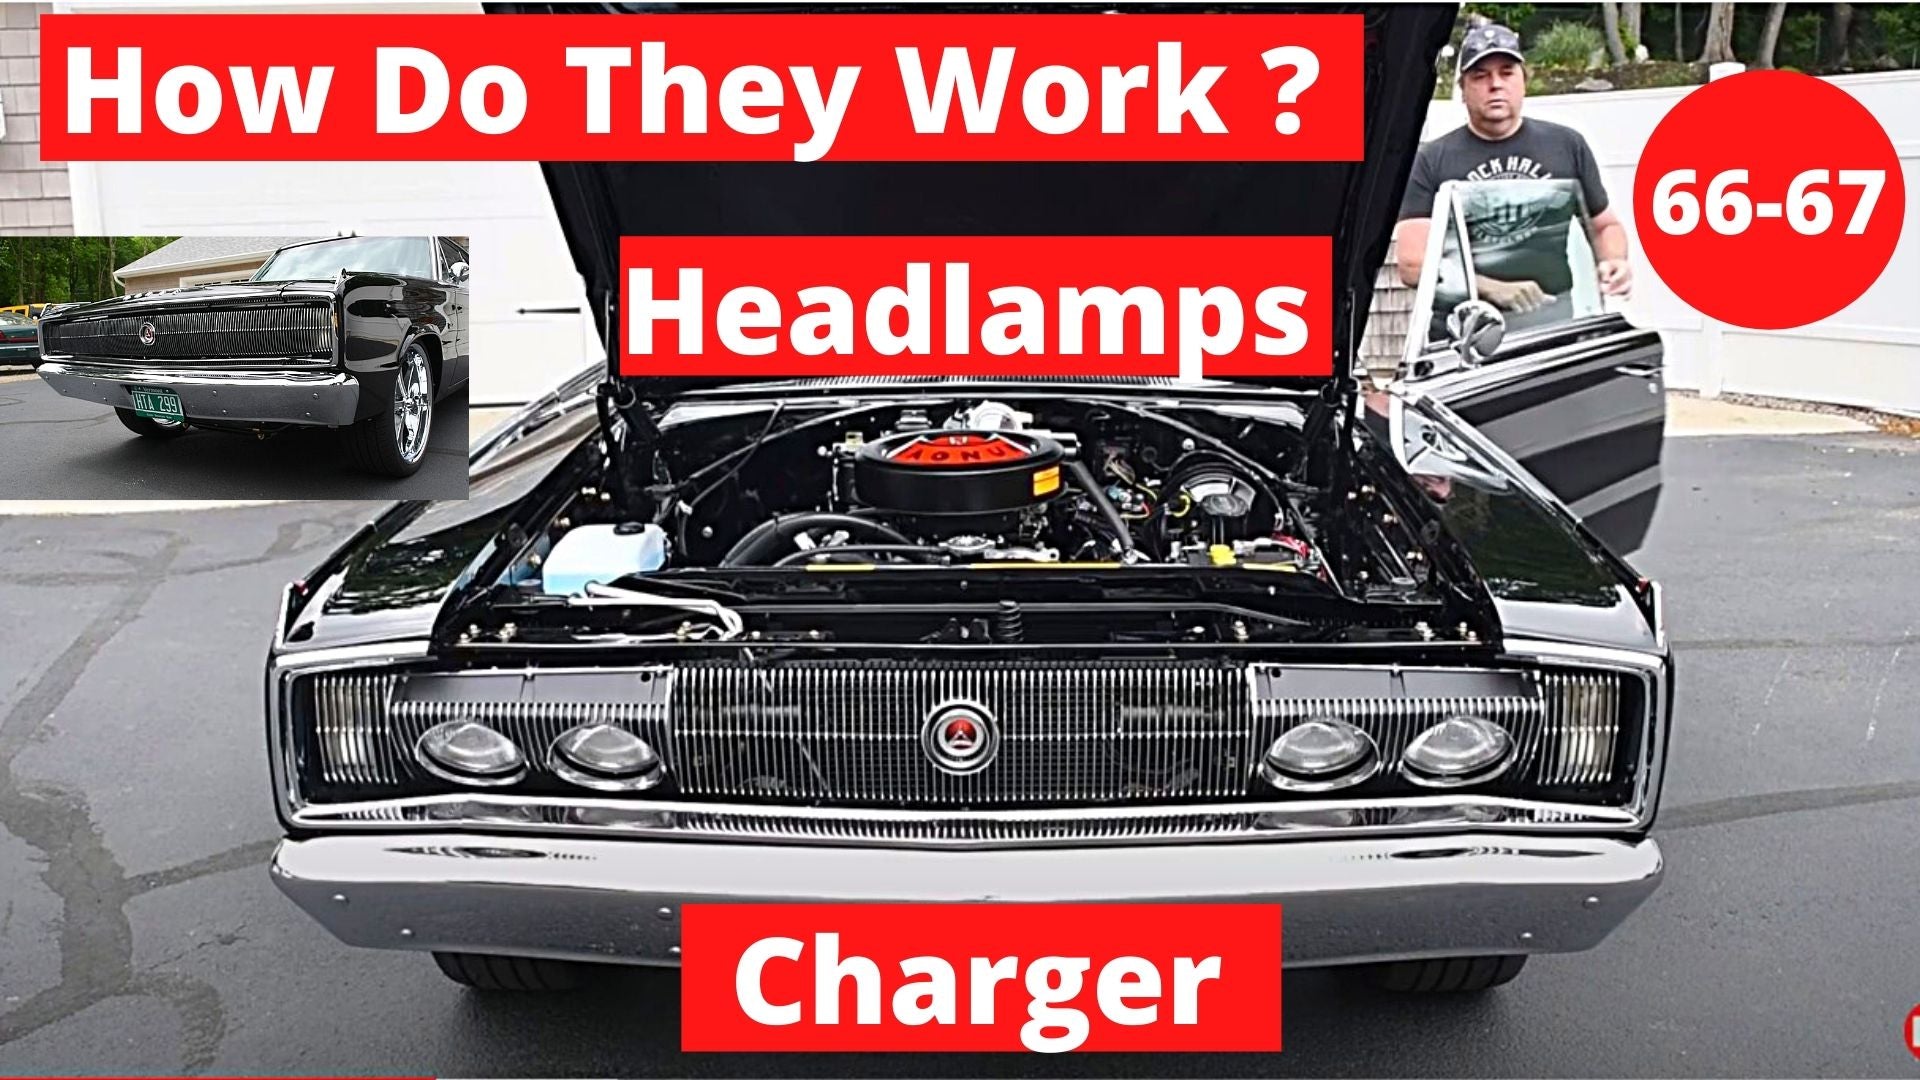 66-67 Dodge Charger How the Headlamps Work